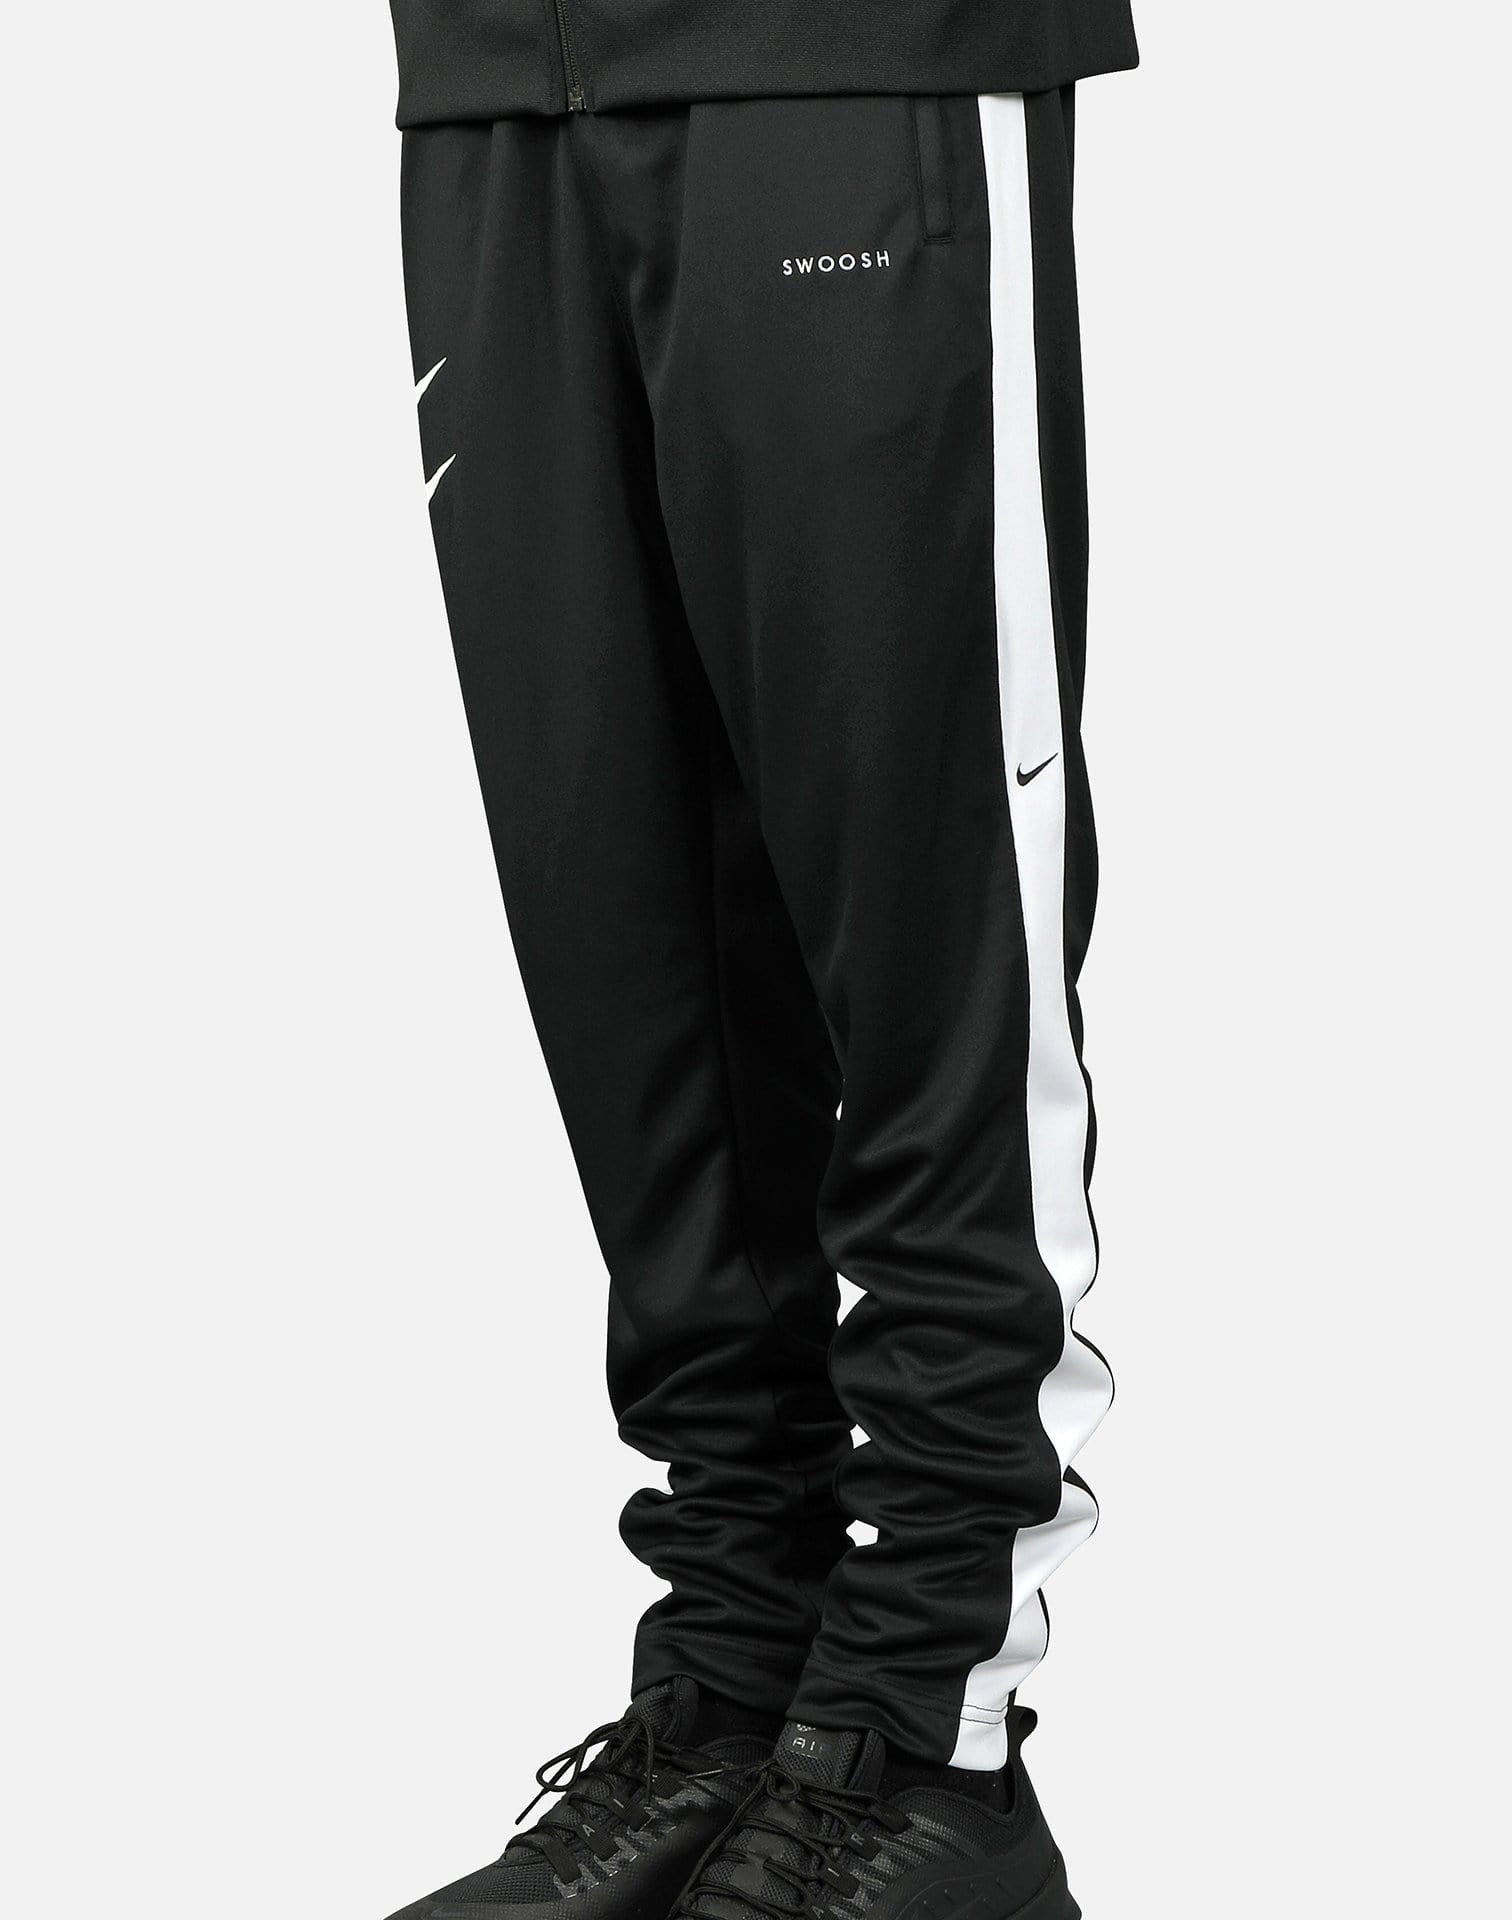 NSW STACKED SWOOSH PANTS – DTLR